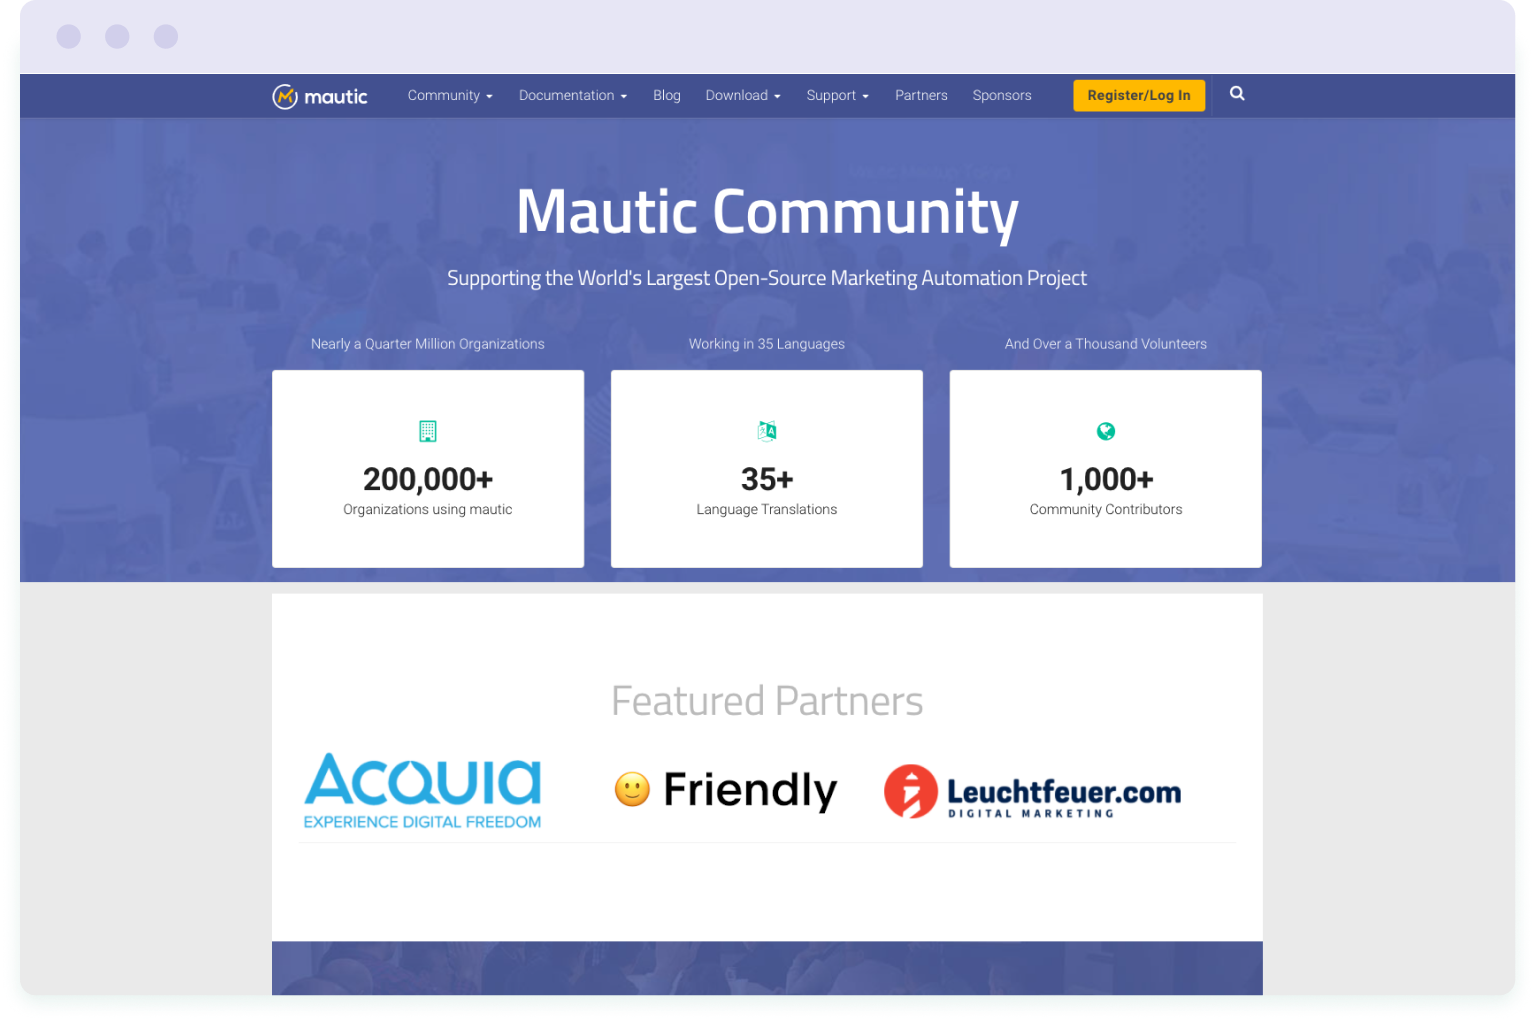 Image of Mautic website homepage